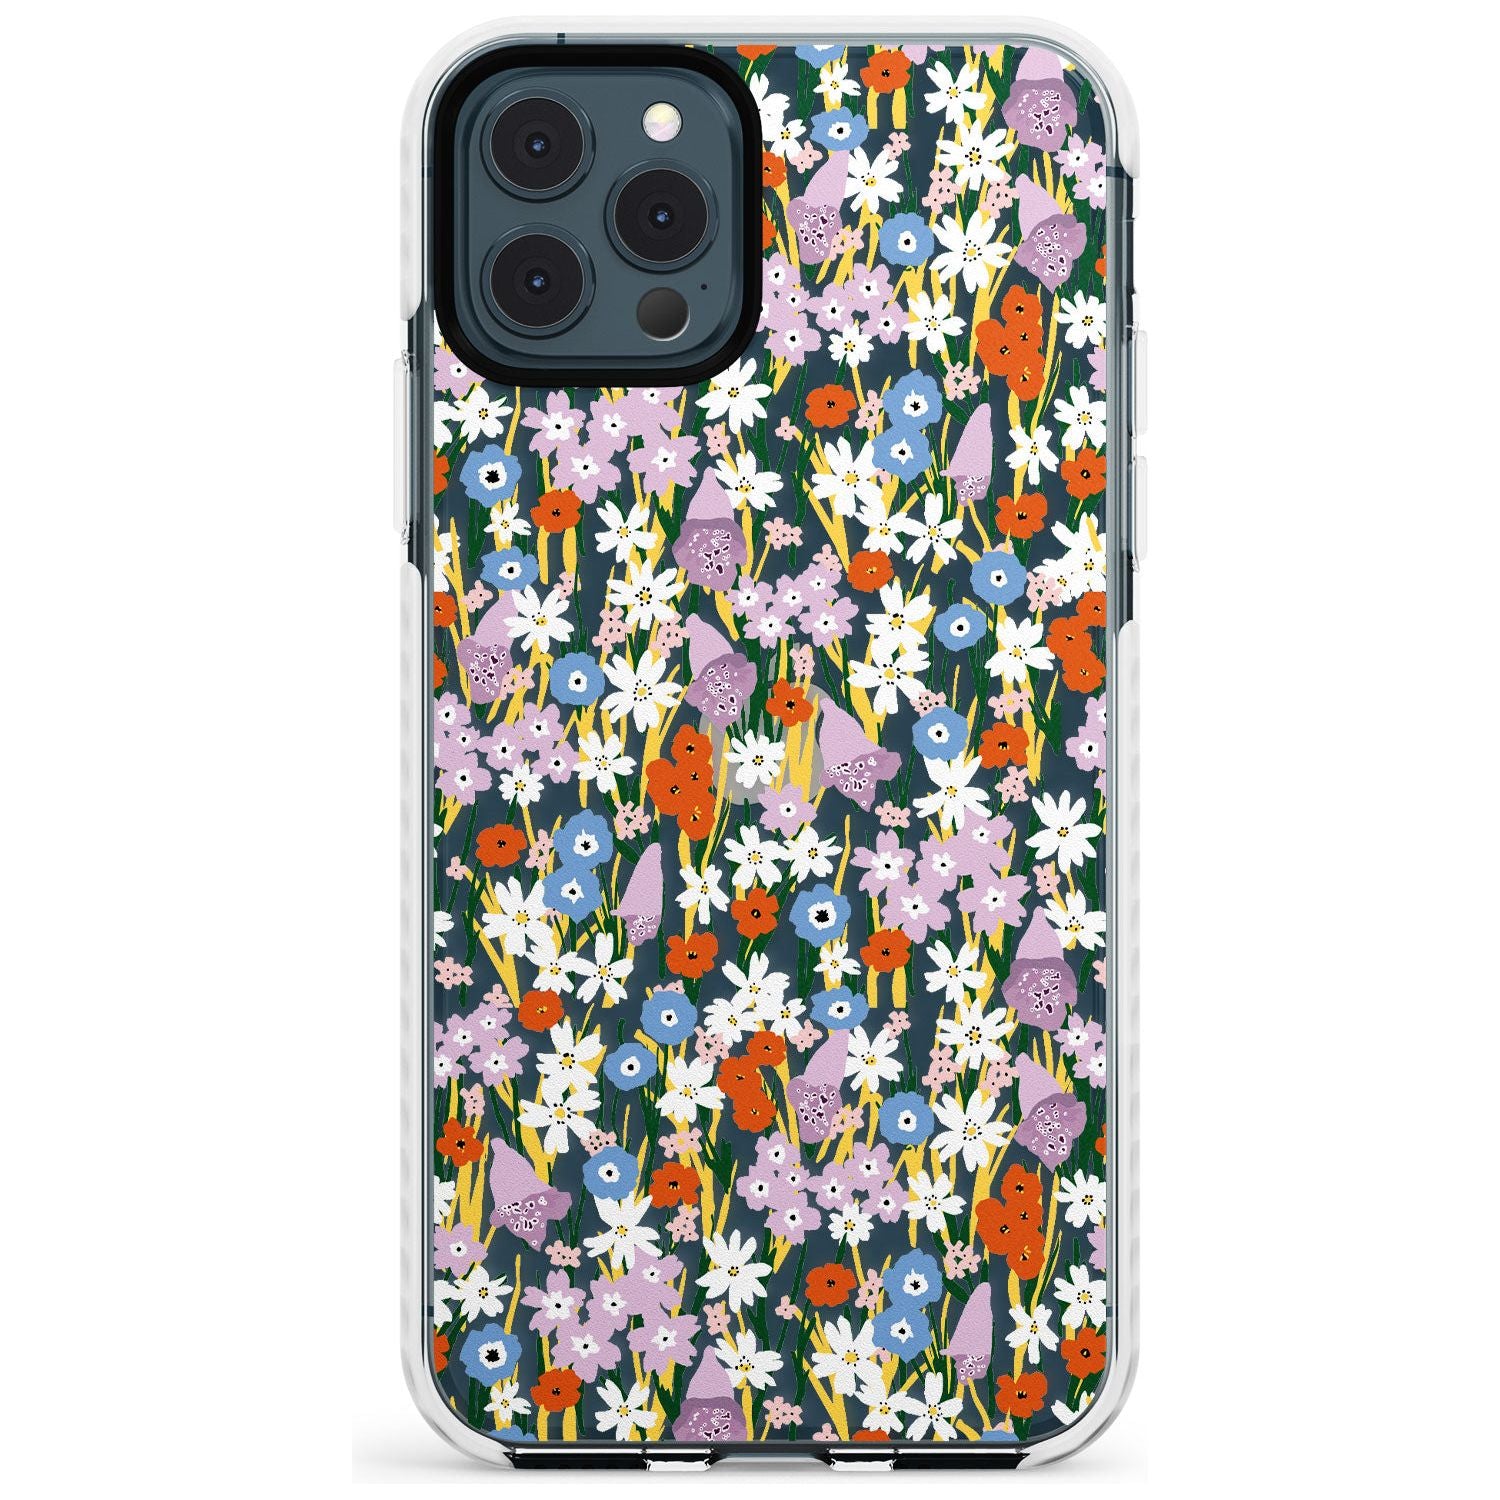 Energetic Floral Mix: Transparent Slim TPU Phone Case for iPhone 11 Pro Max